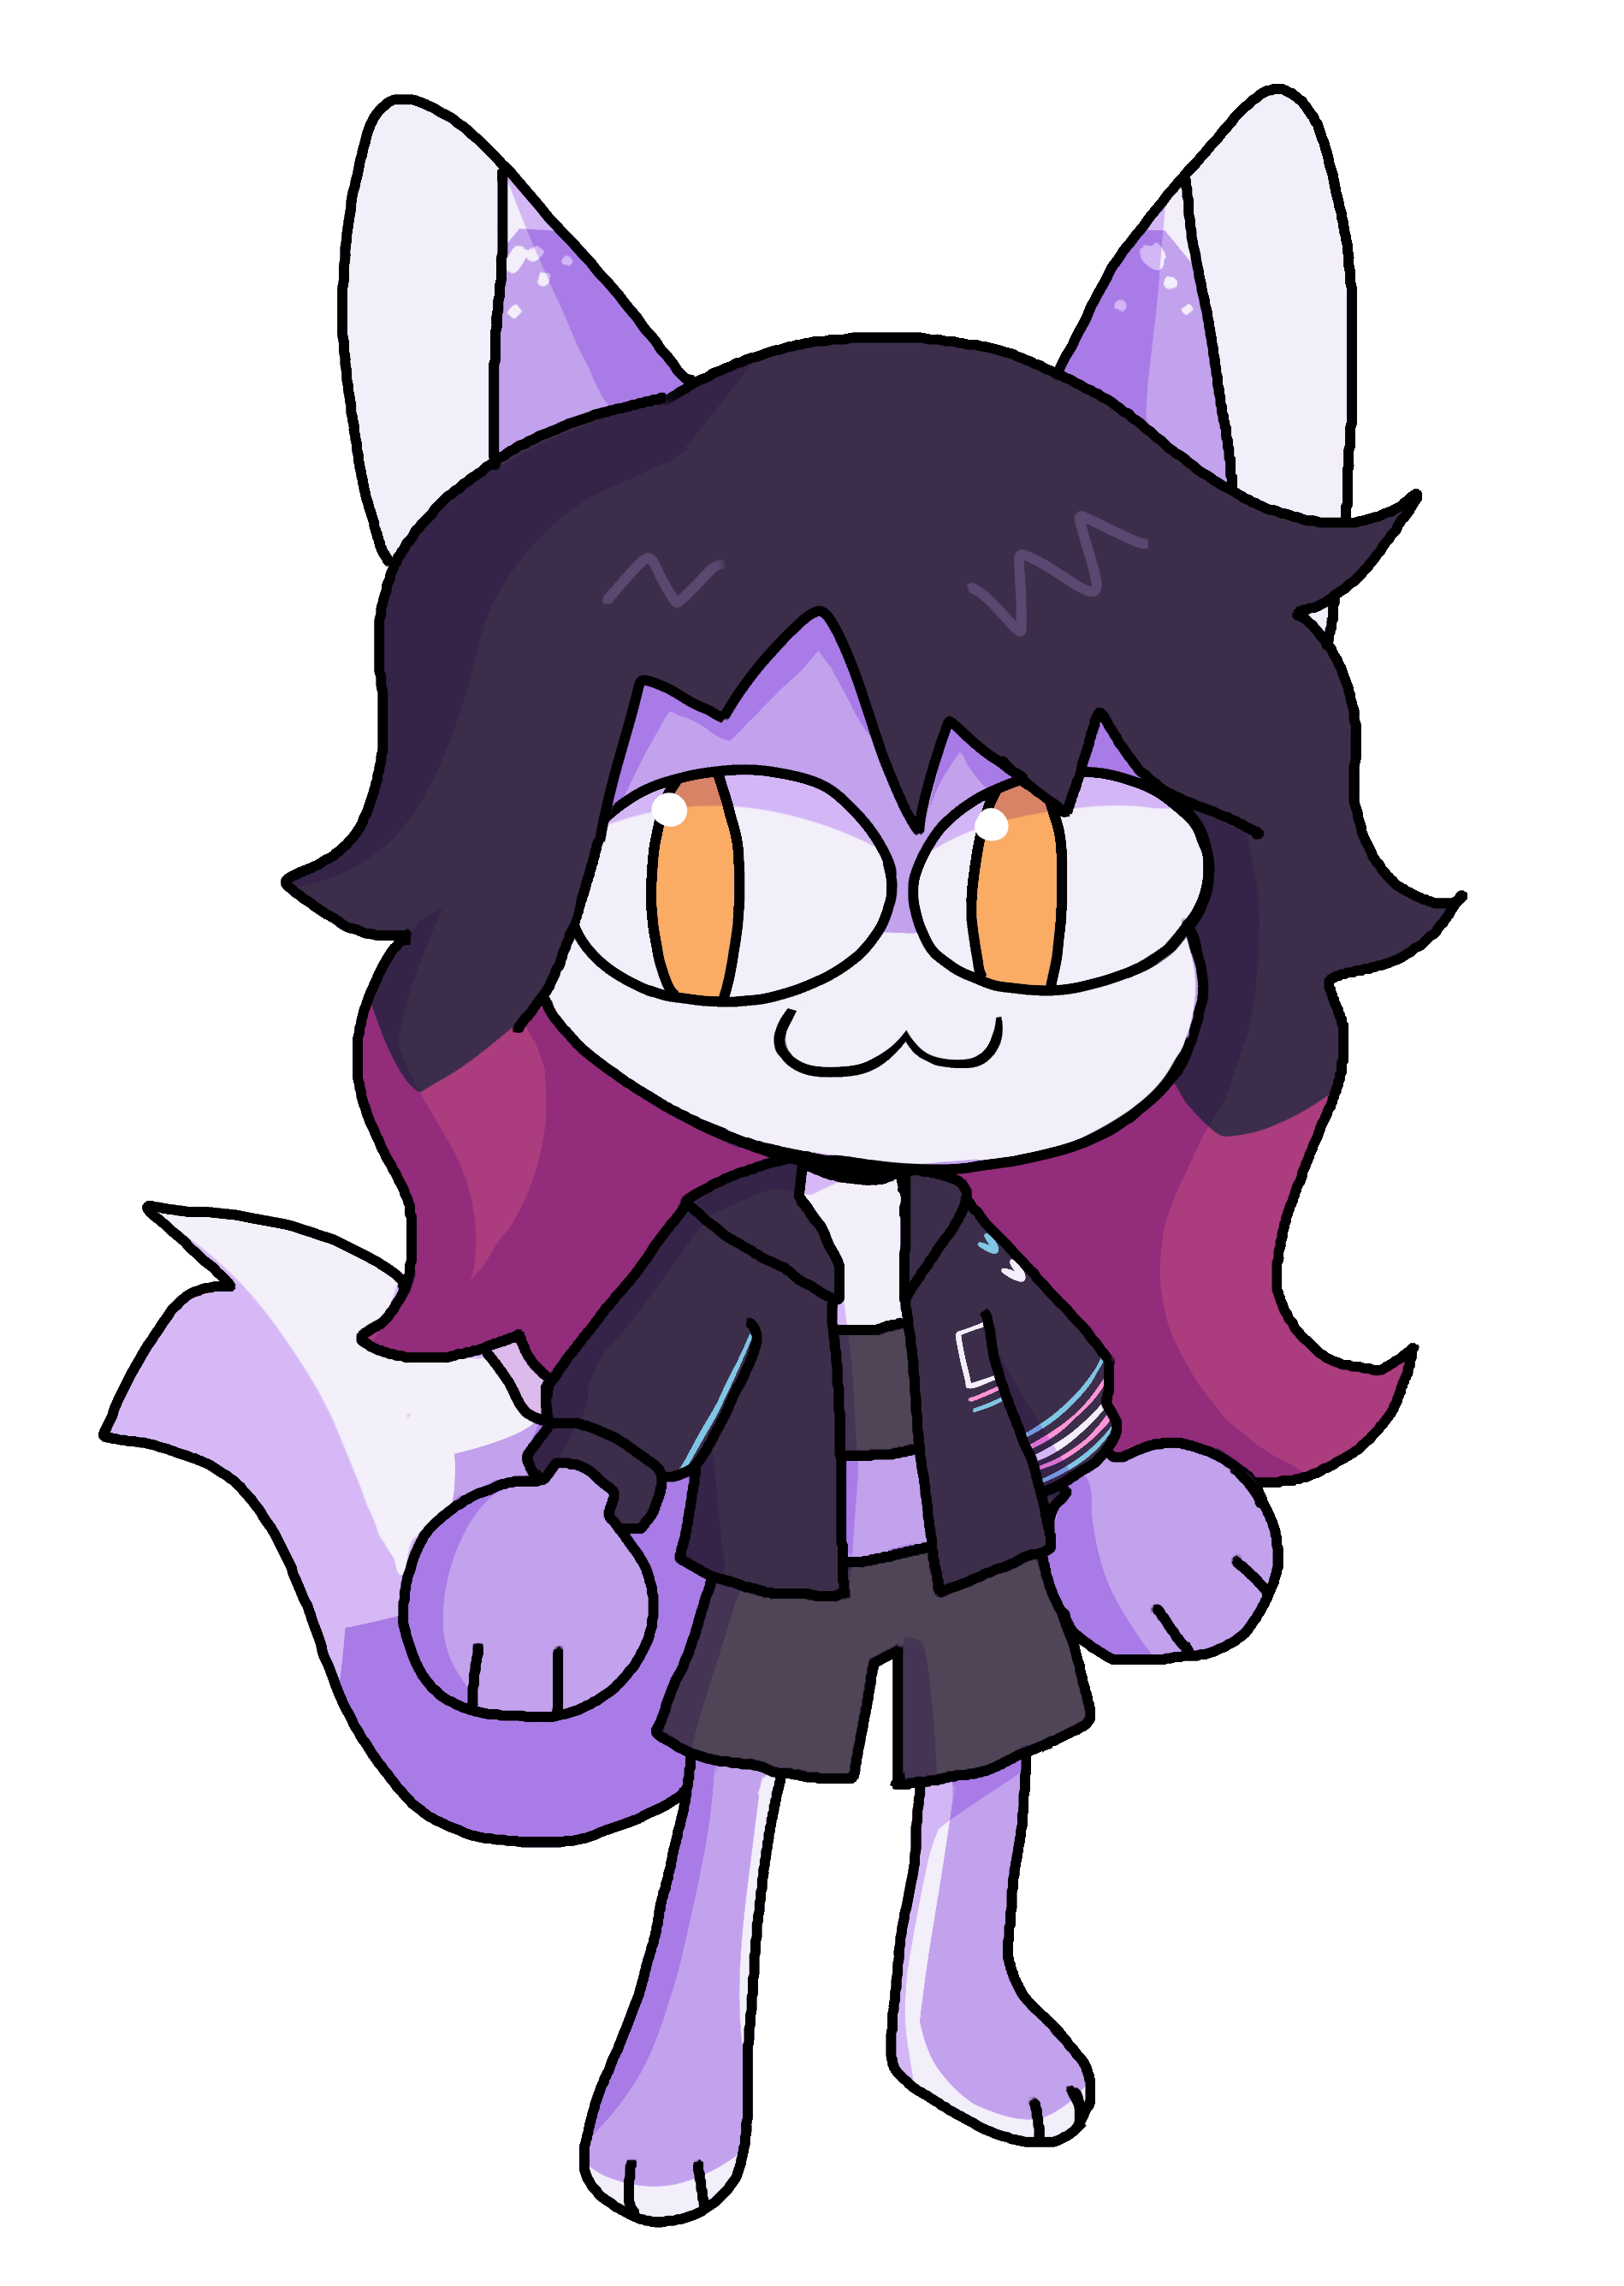 neco arc from melty blood, redrawn as my fursona